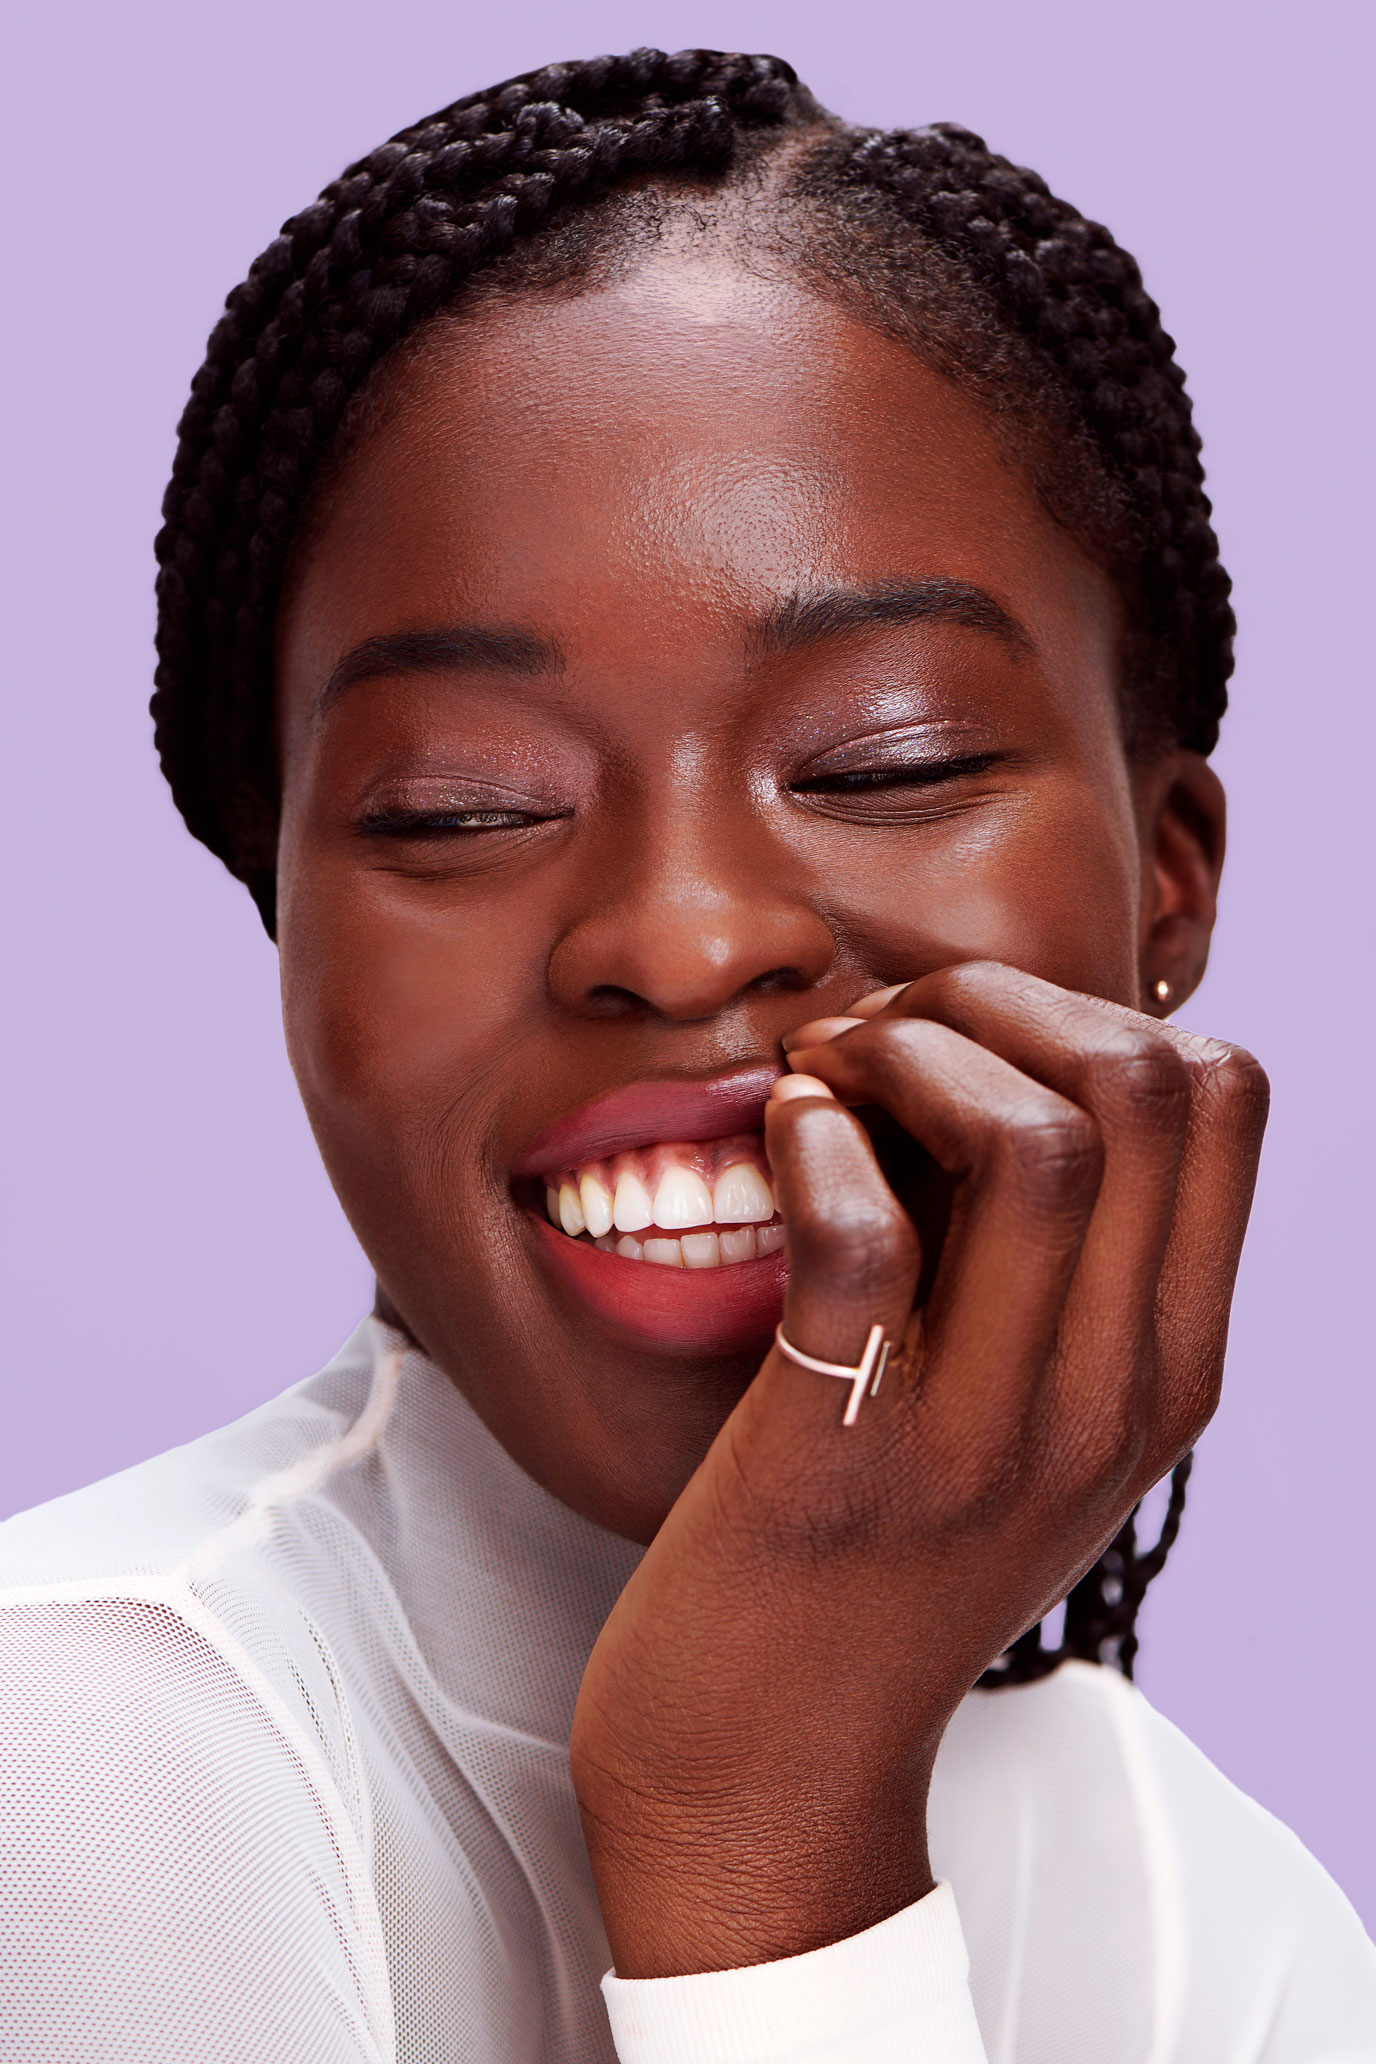 Tight portrait of Black female model with purple background